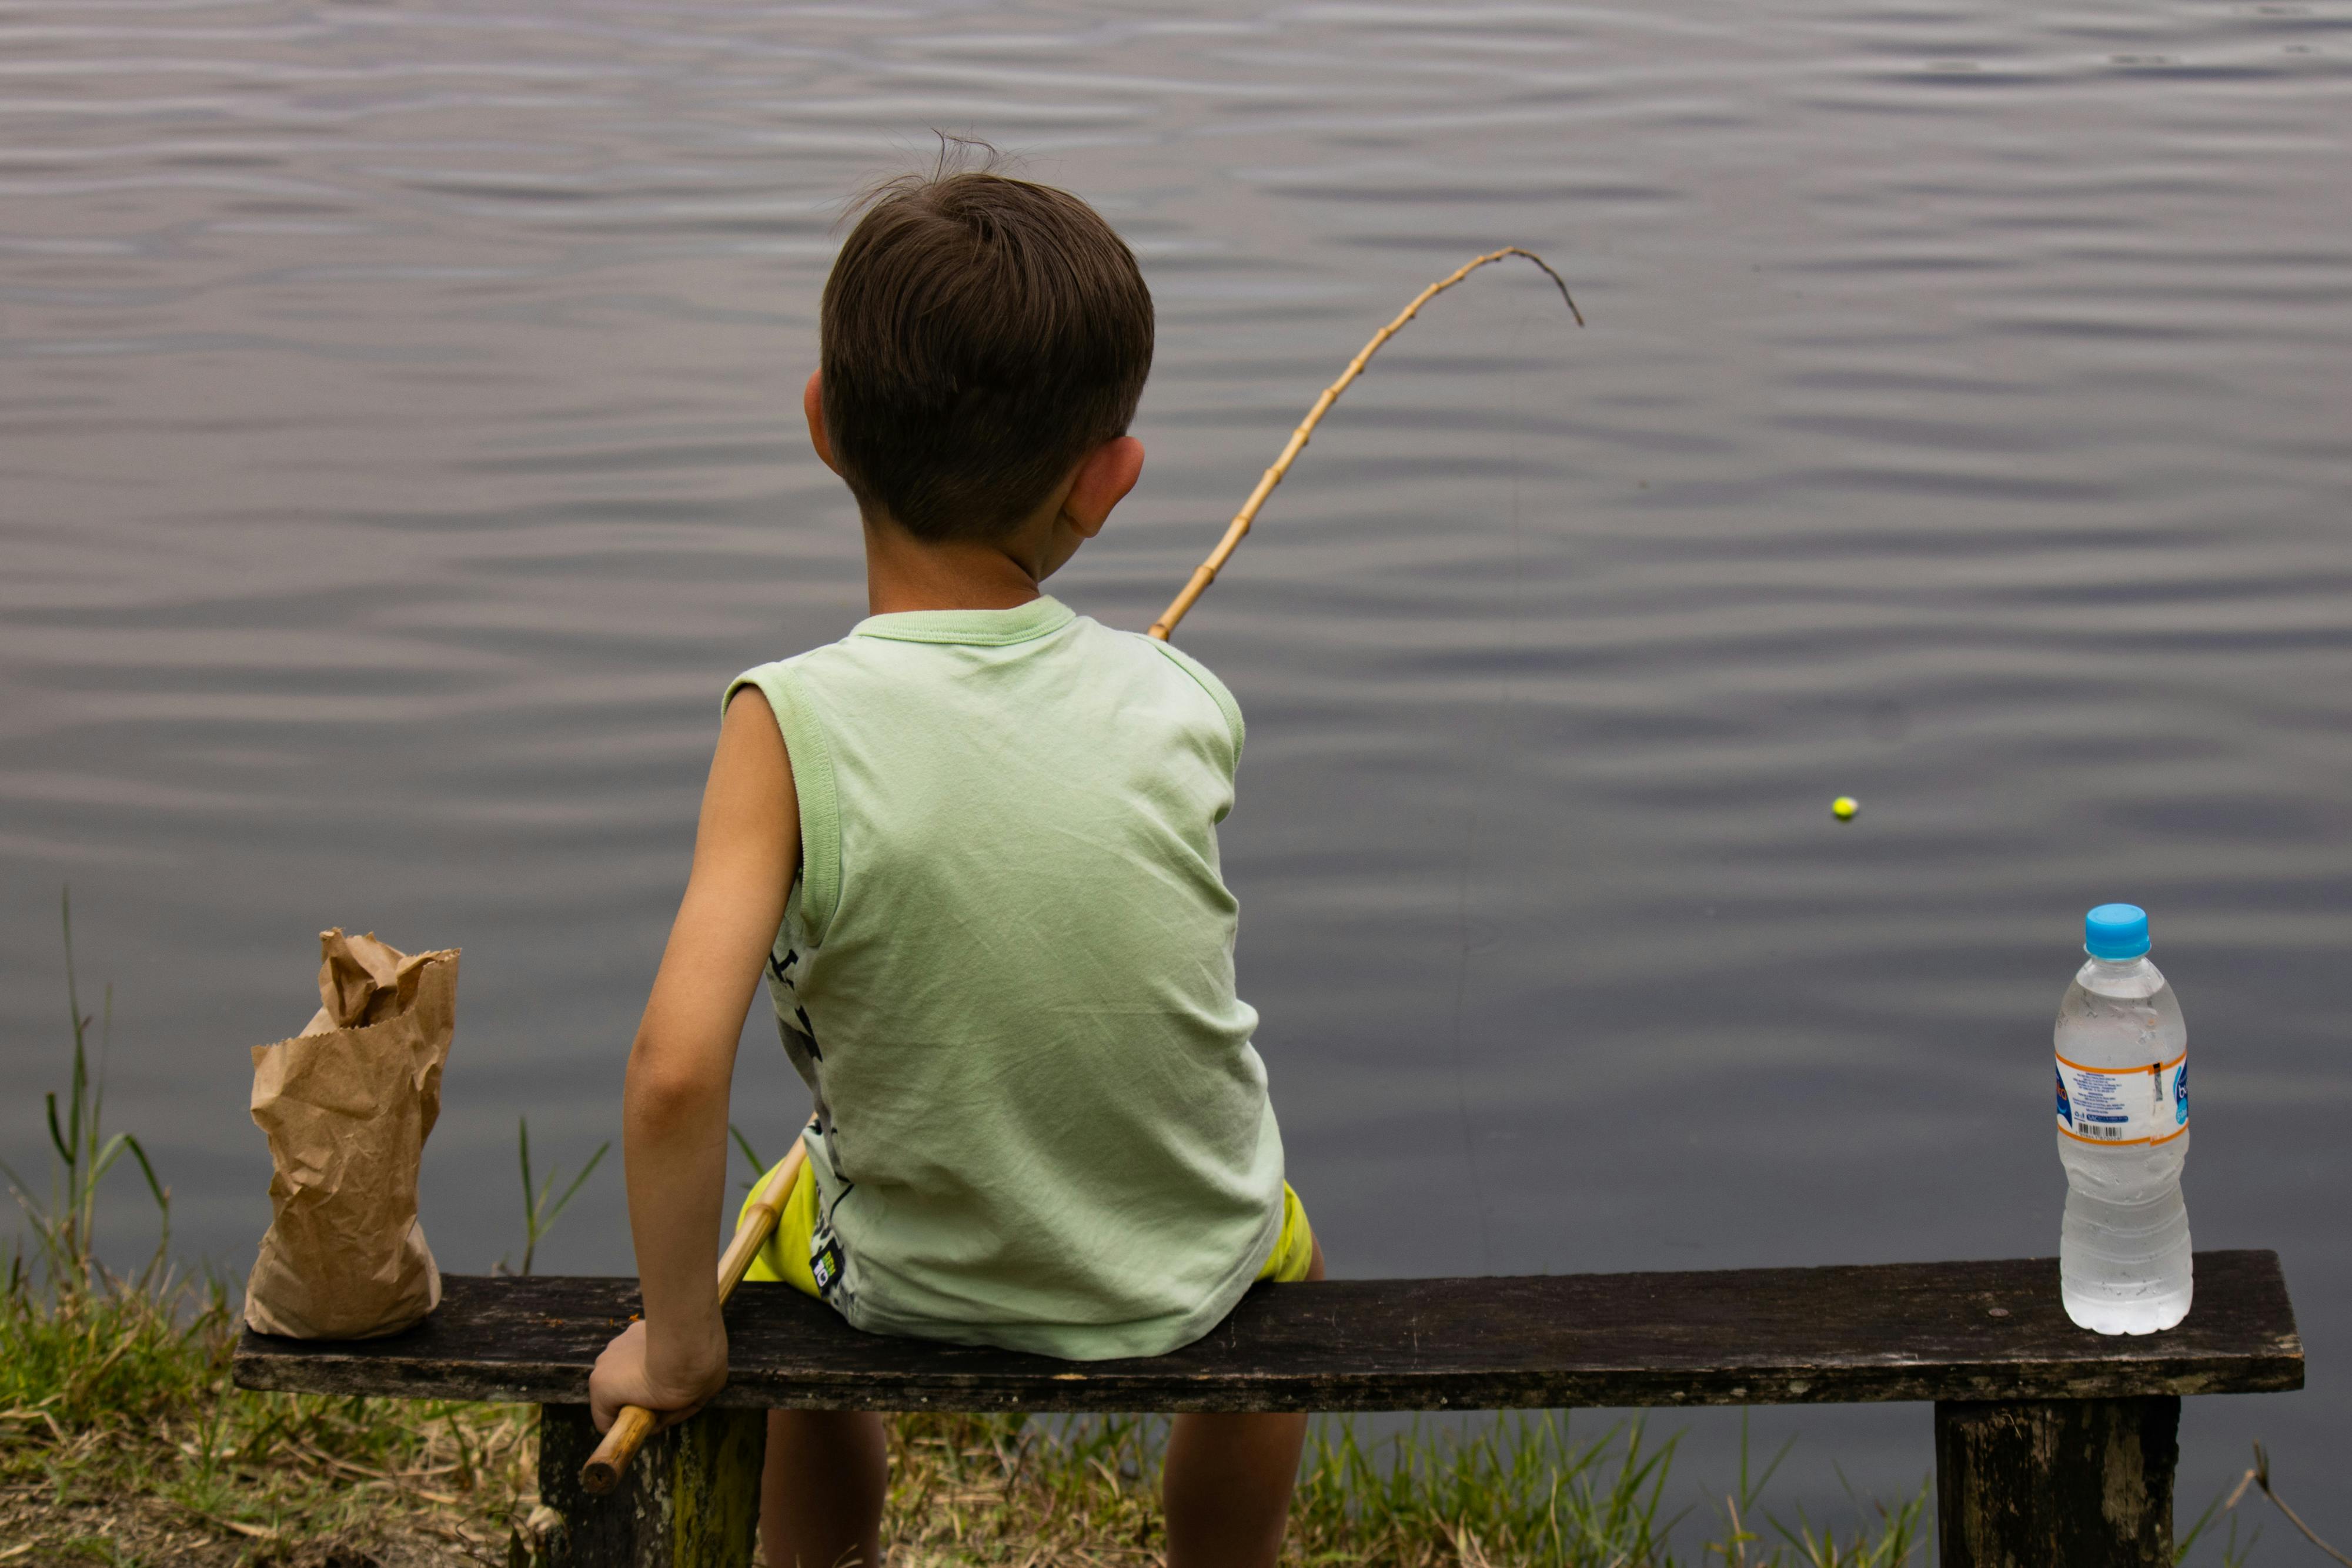 Boy Fishing with Wooden Fishing Rod · Free Stock Photo